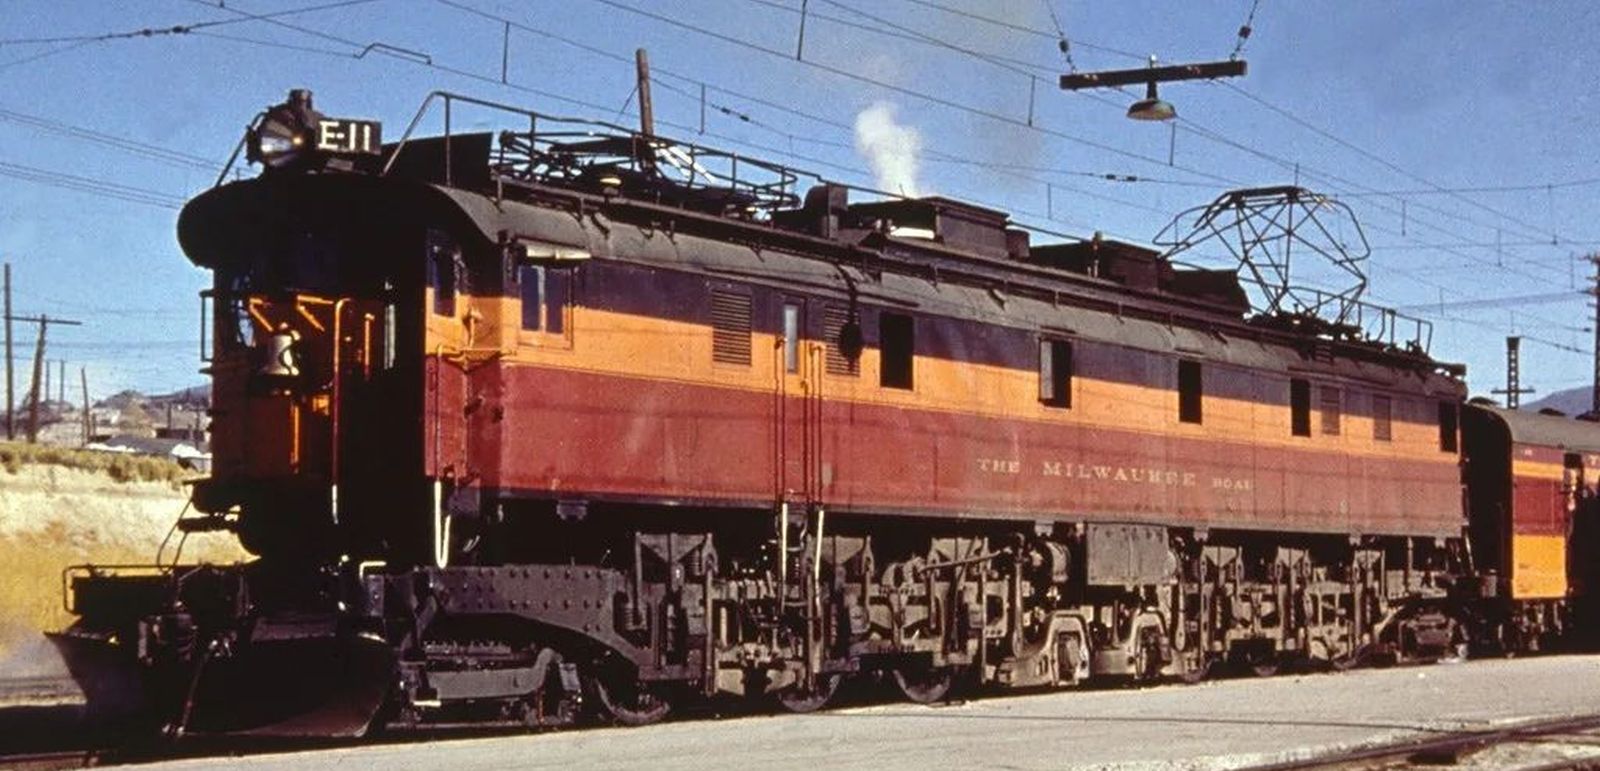 E-11 in December 1952 in front of the “Columbian” in Butte, Montana